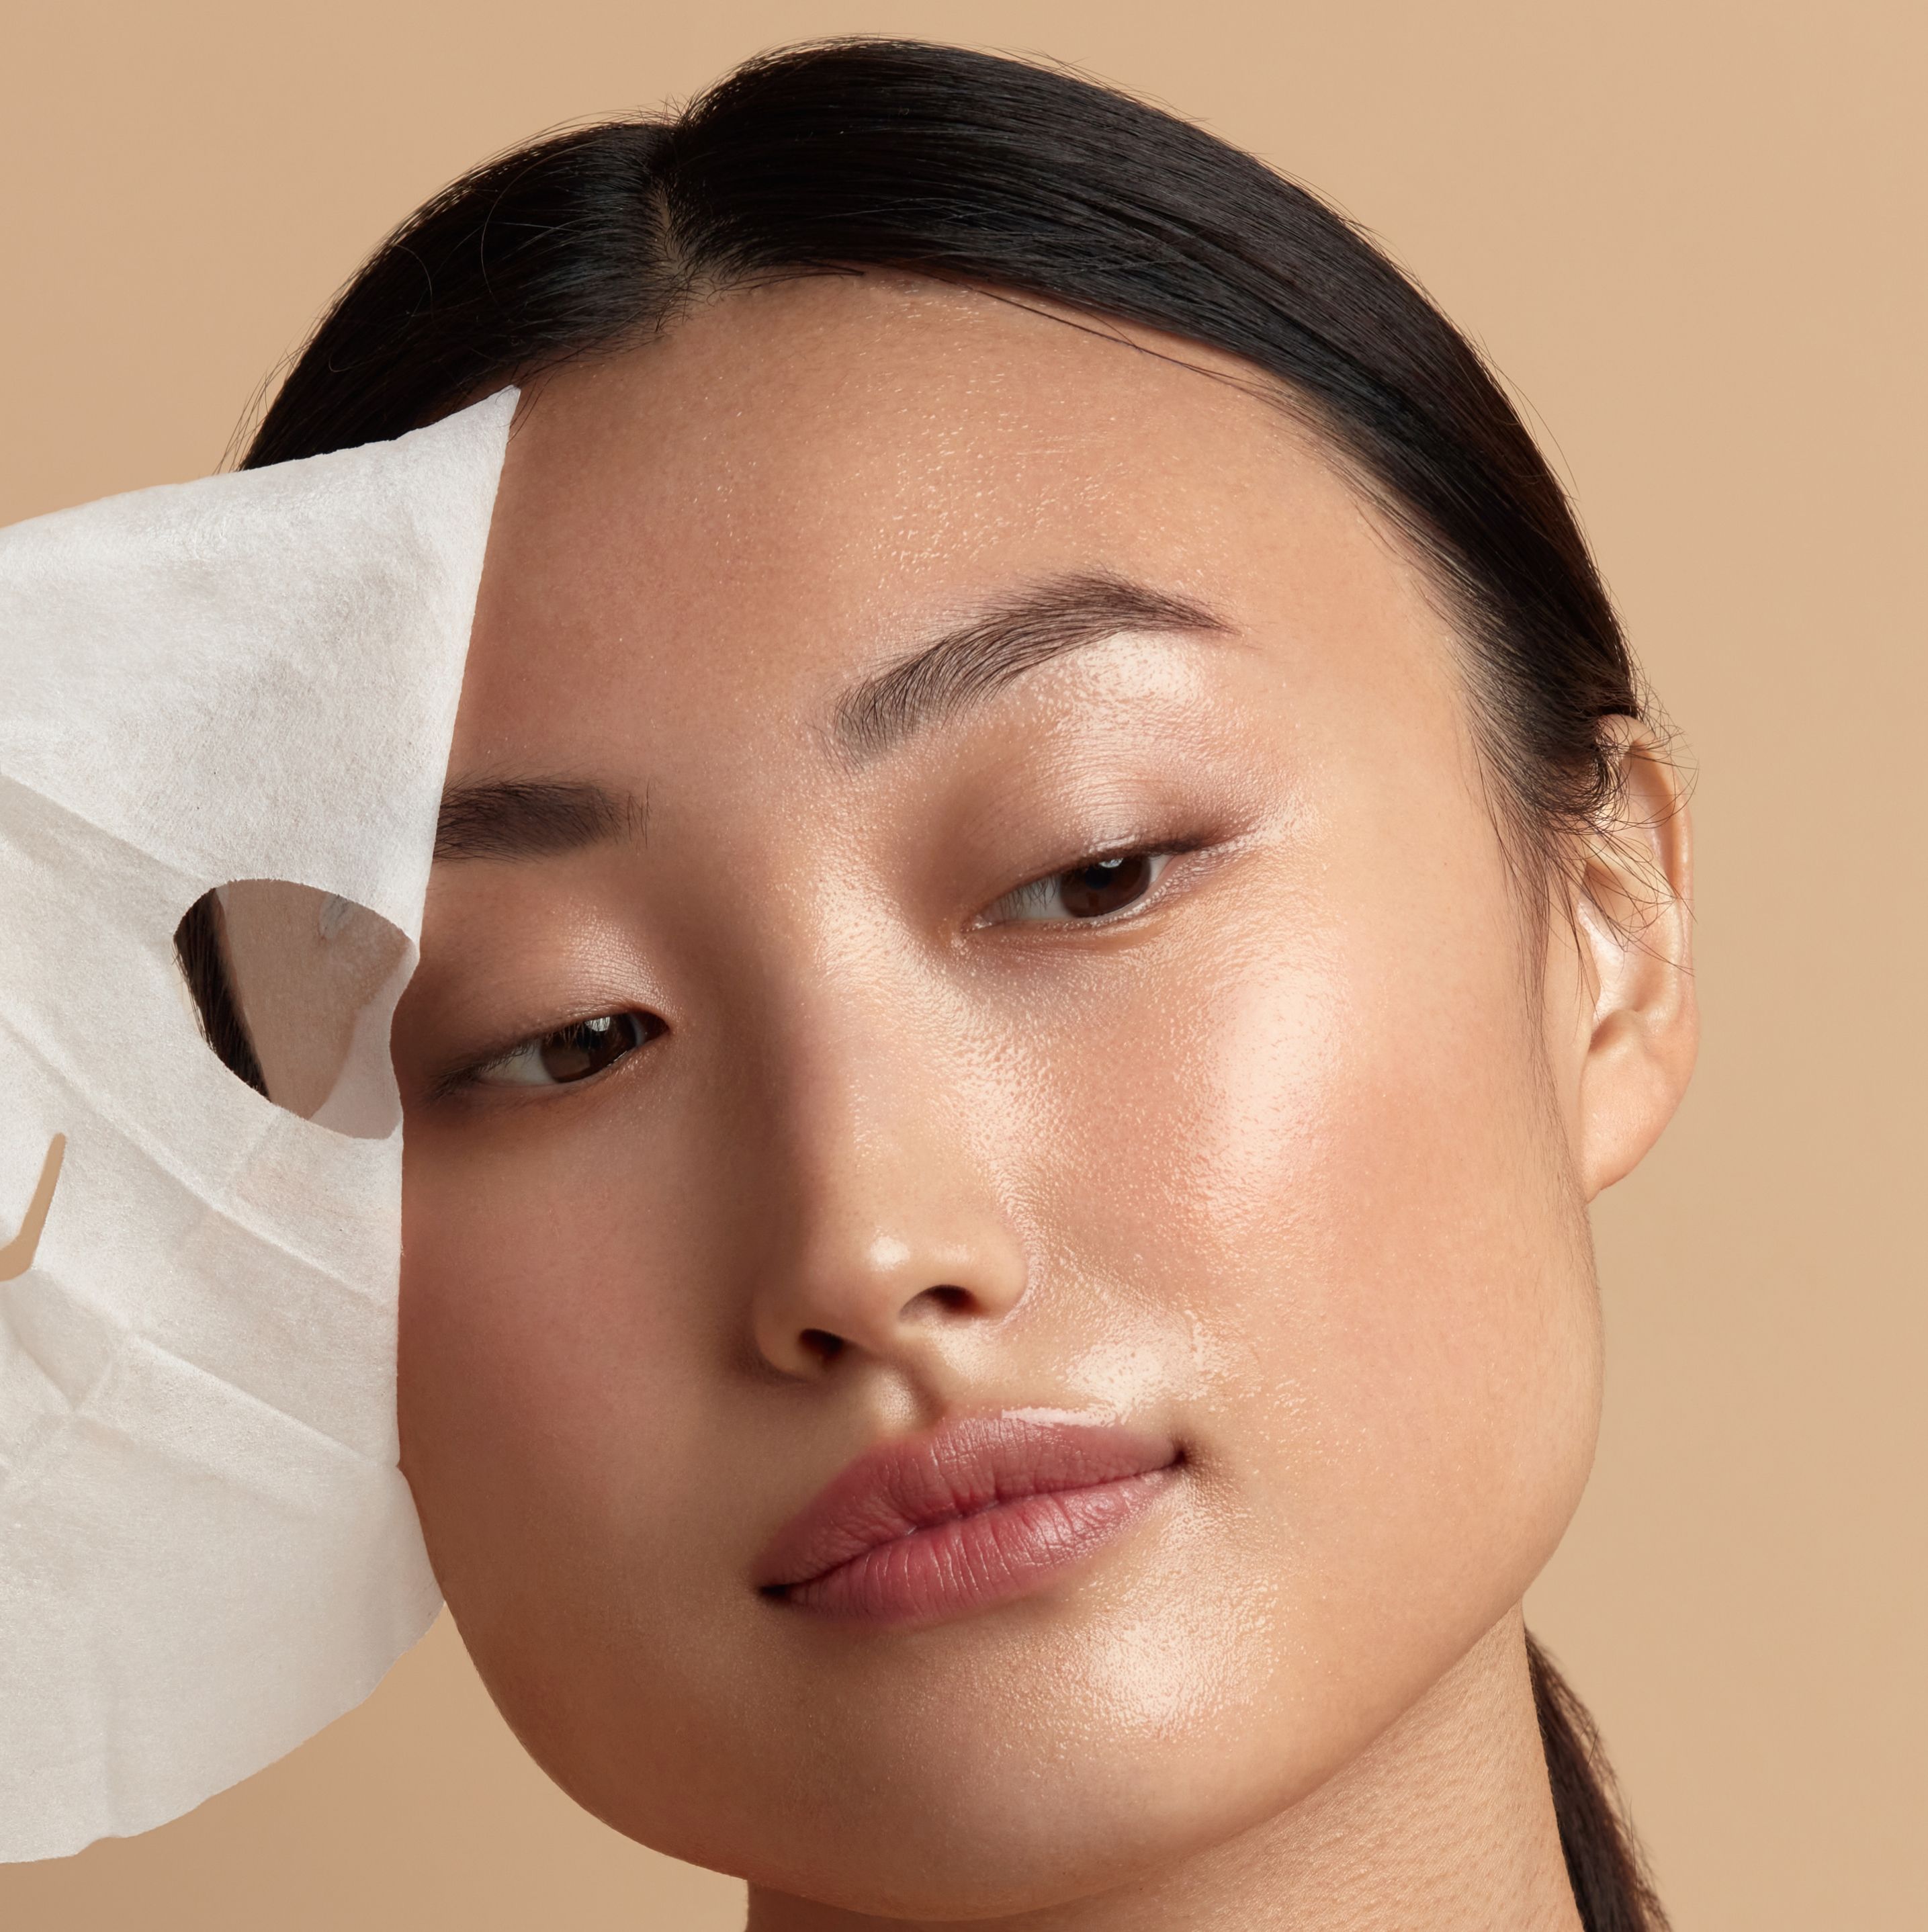 These Sheet Masks Are a Shortcut to Plump, Glowing Skin